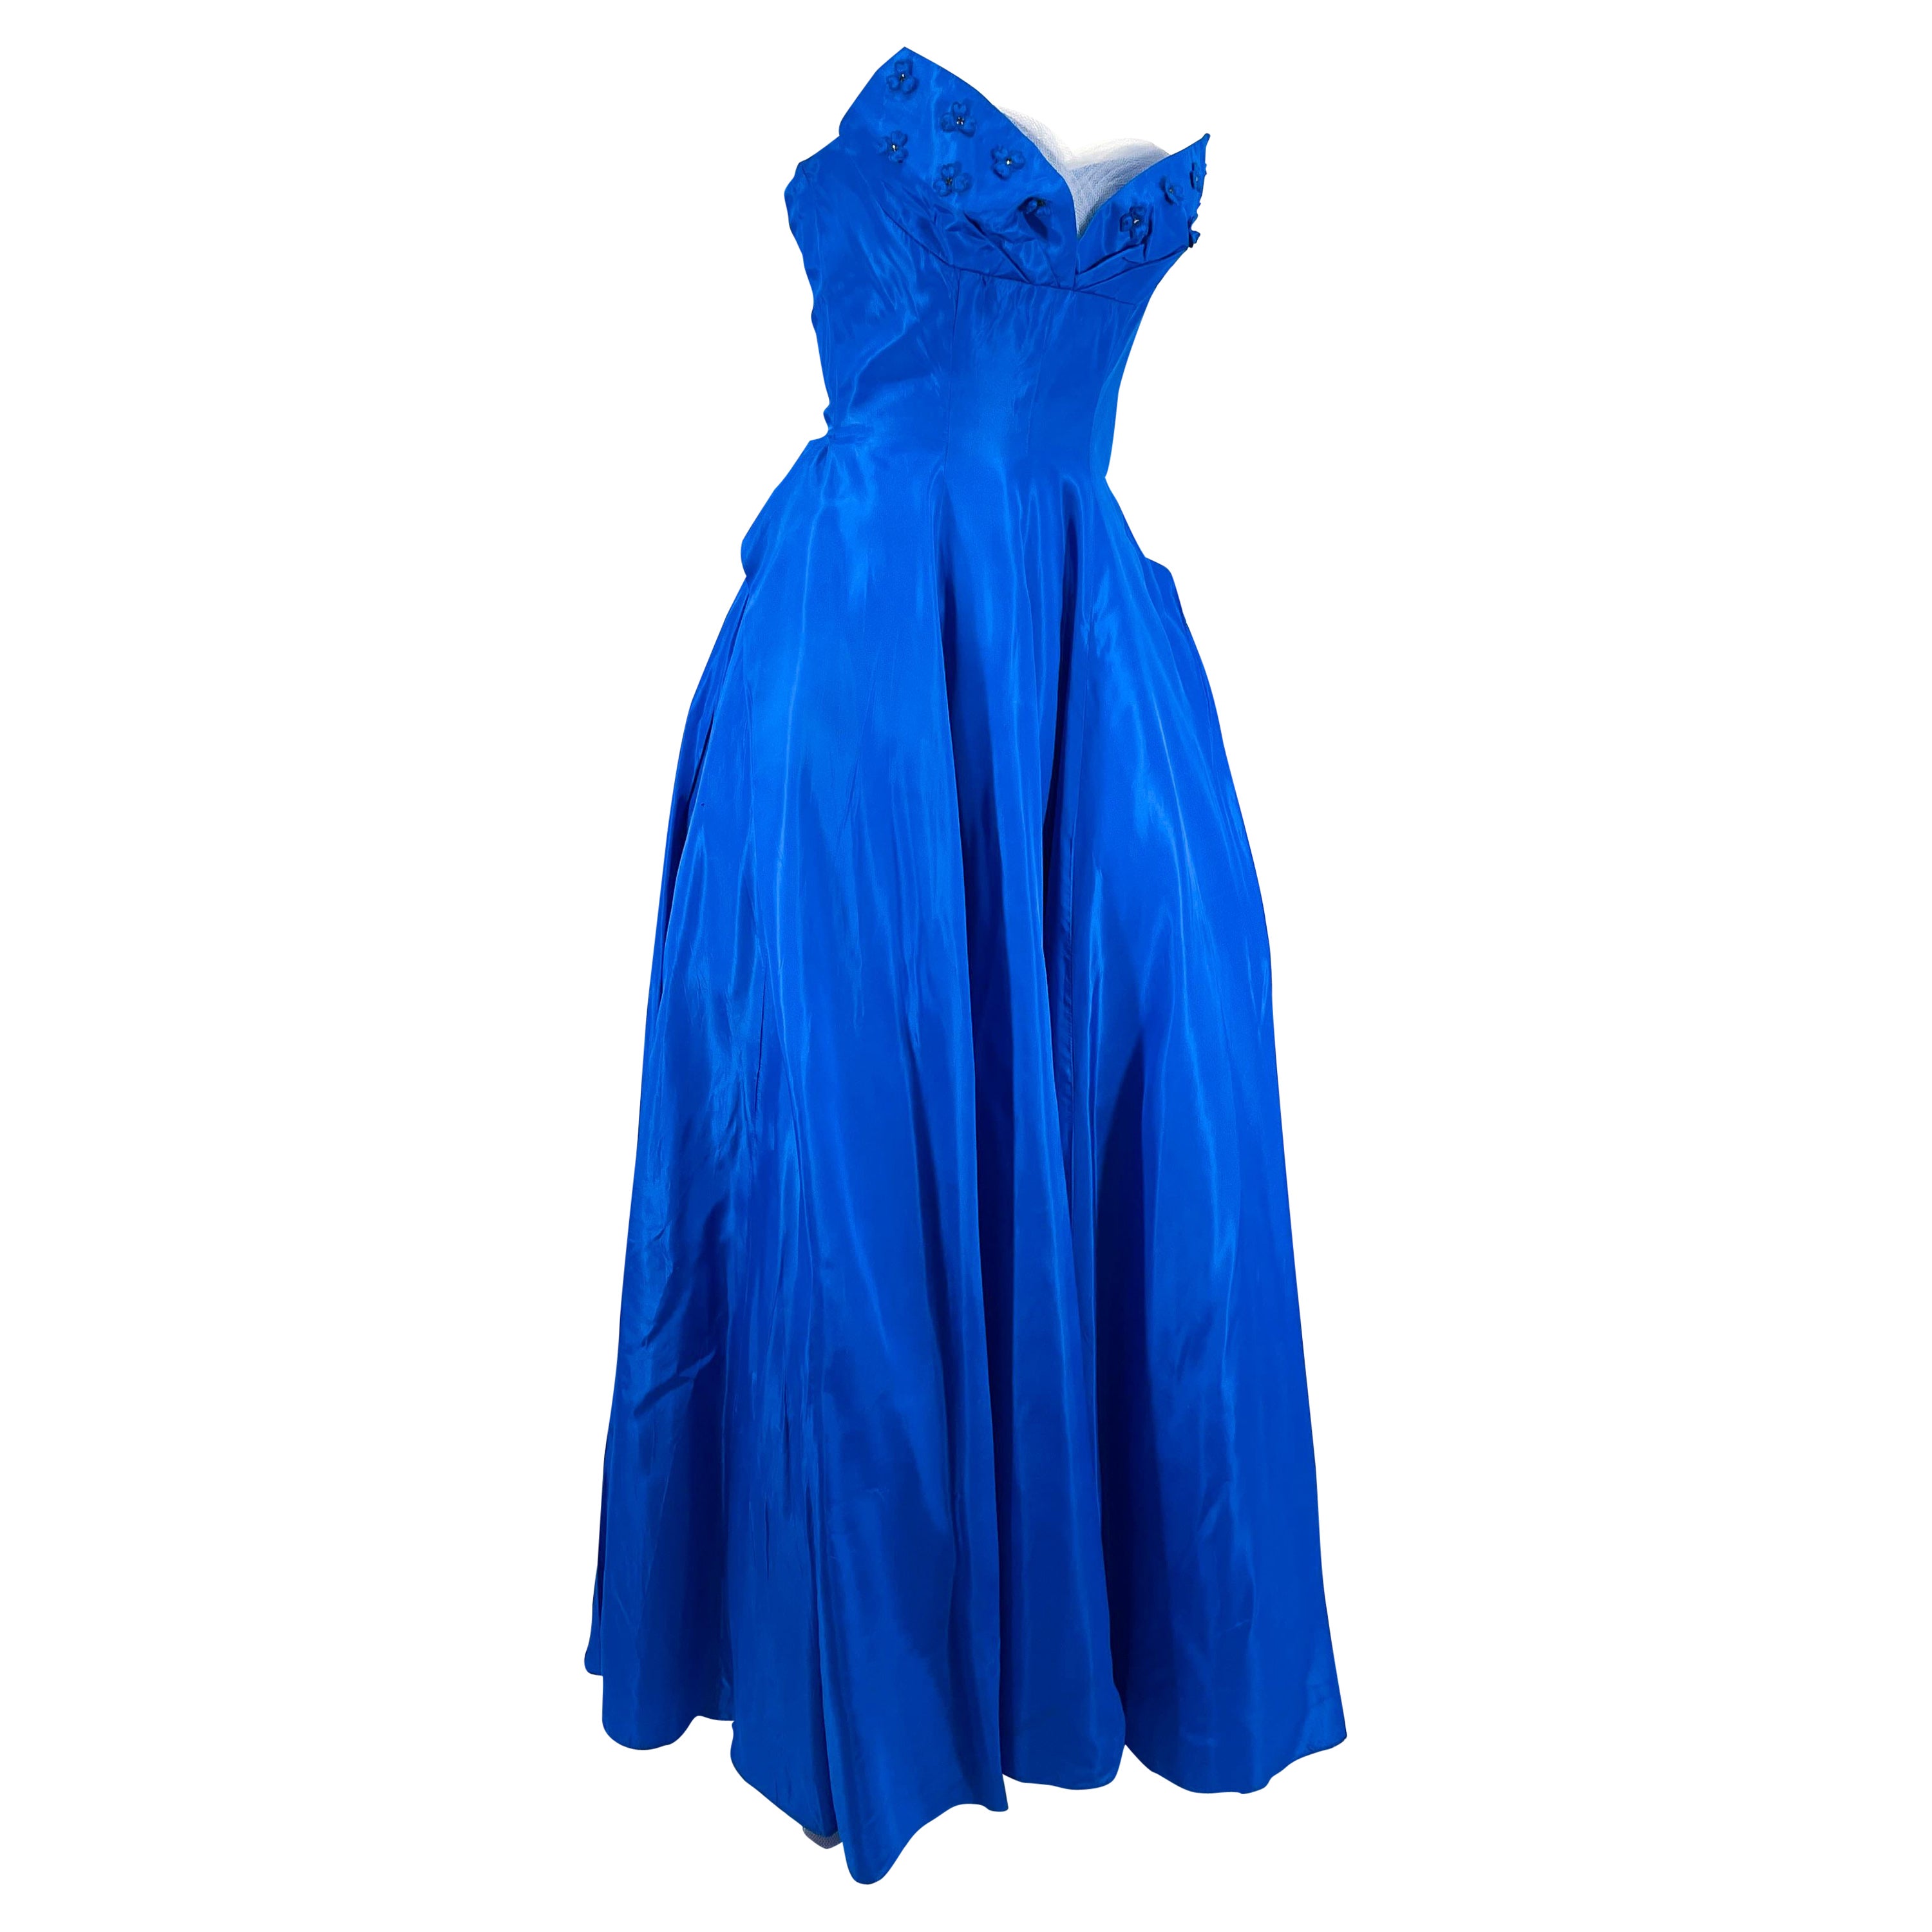 Louis Vuitton® Draped Back Empire Gown Dark Night Blue. Size 36 in